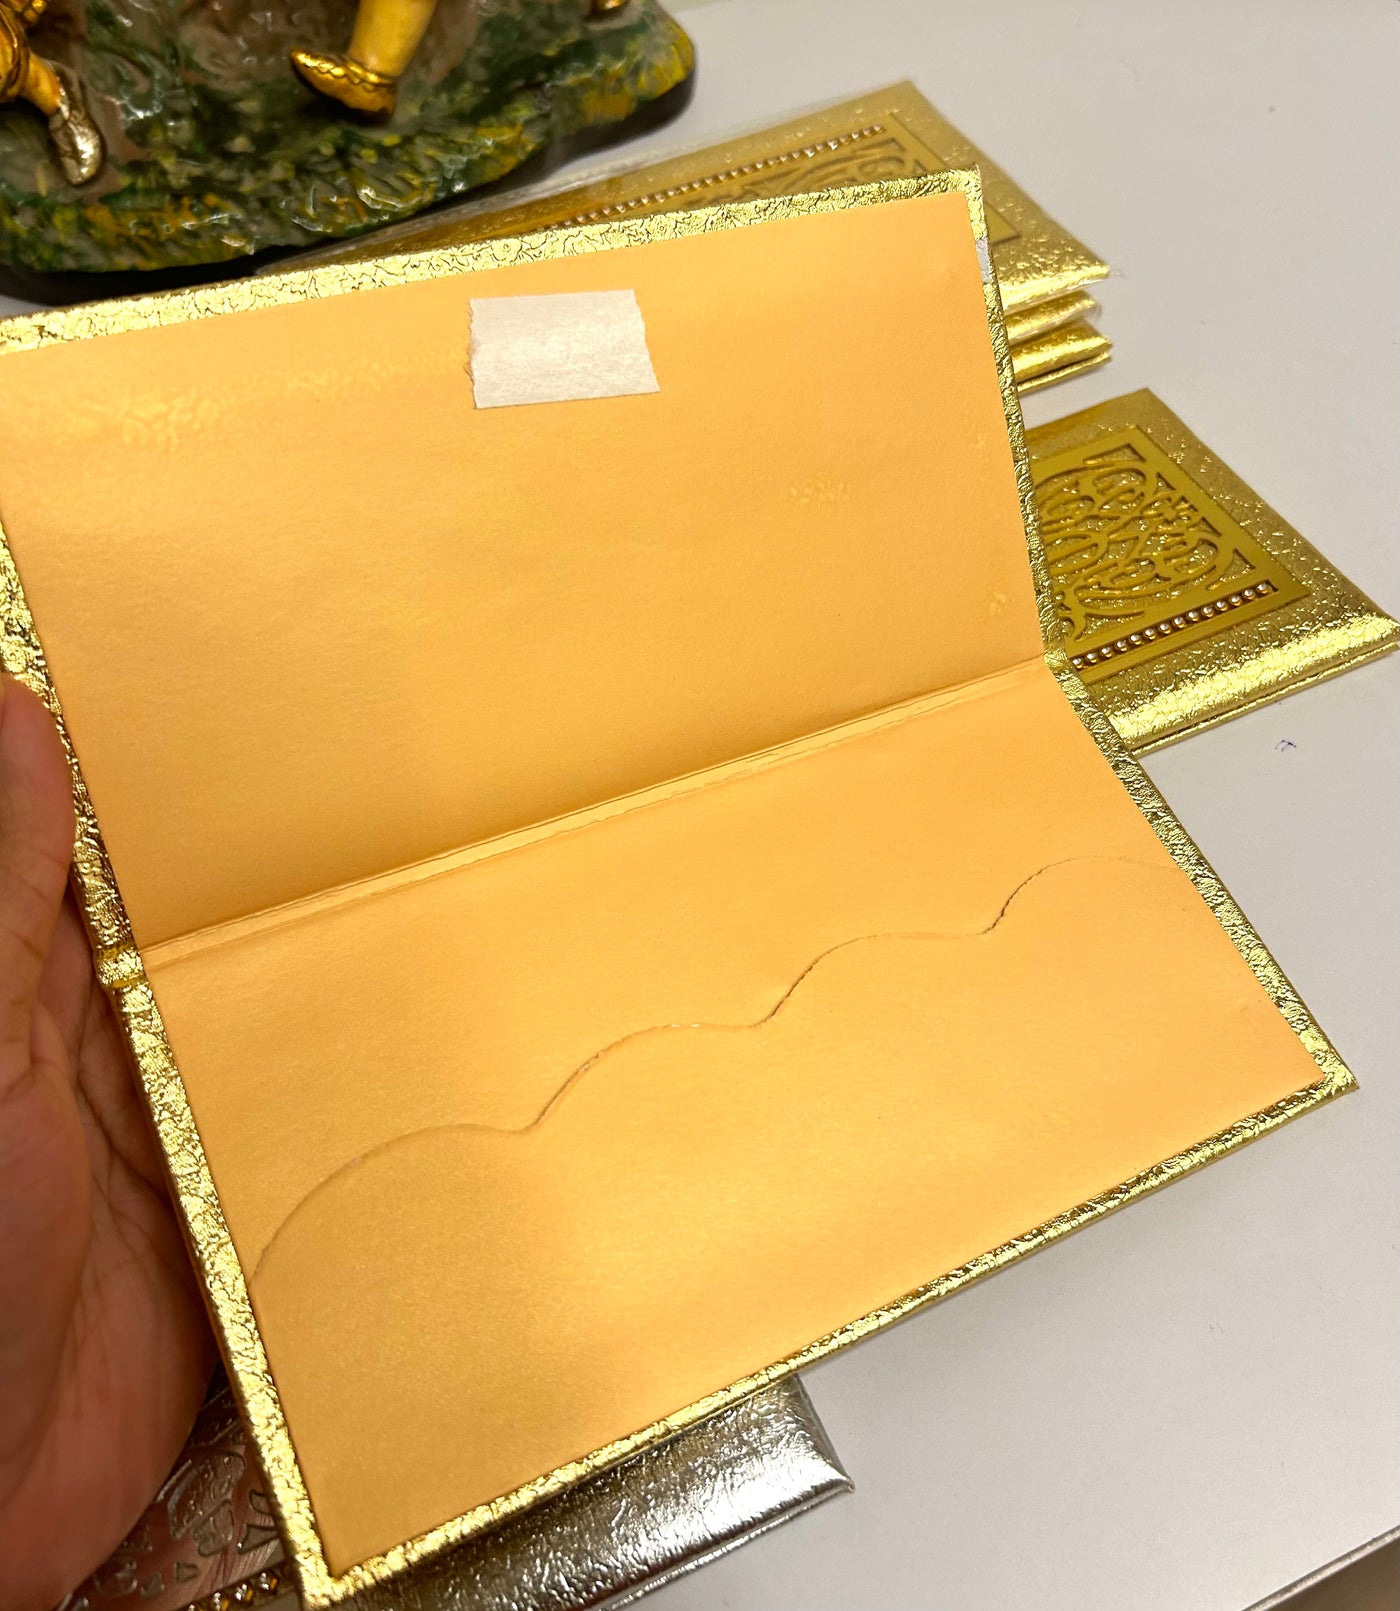 Fanvy Shagun envelopes for guests in weddings, pooja ceremony (Golden and silver color)